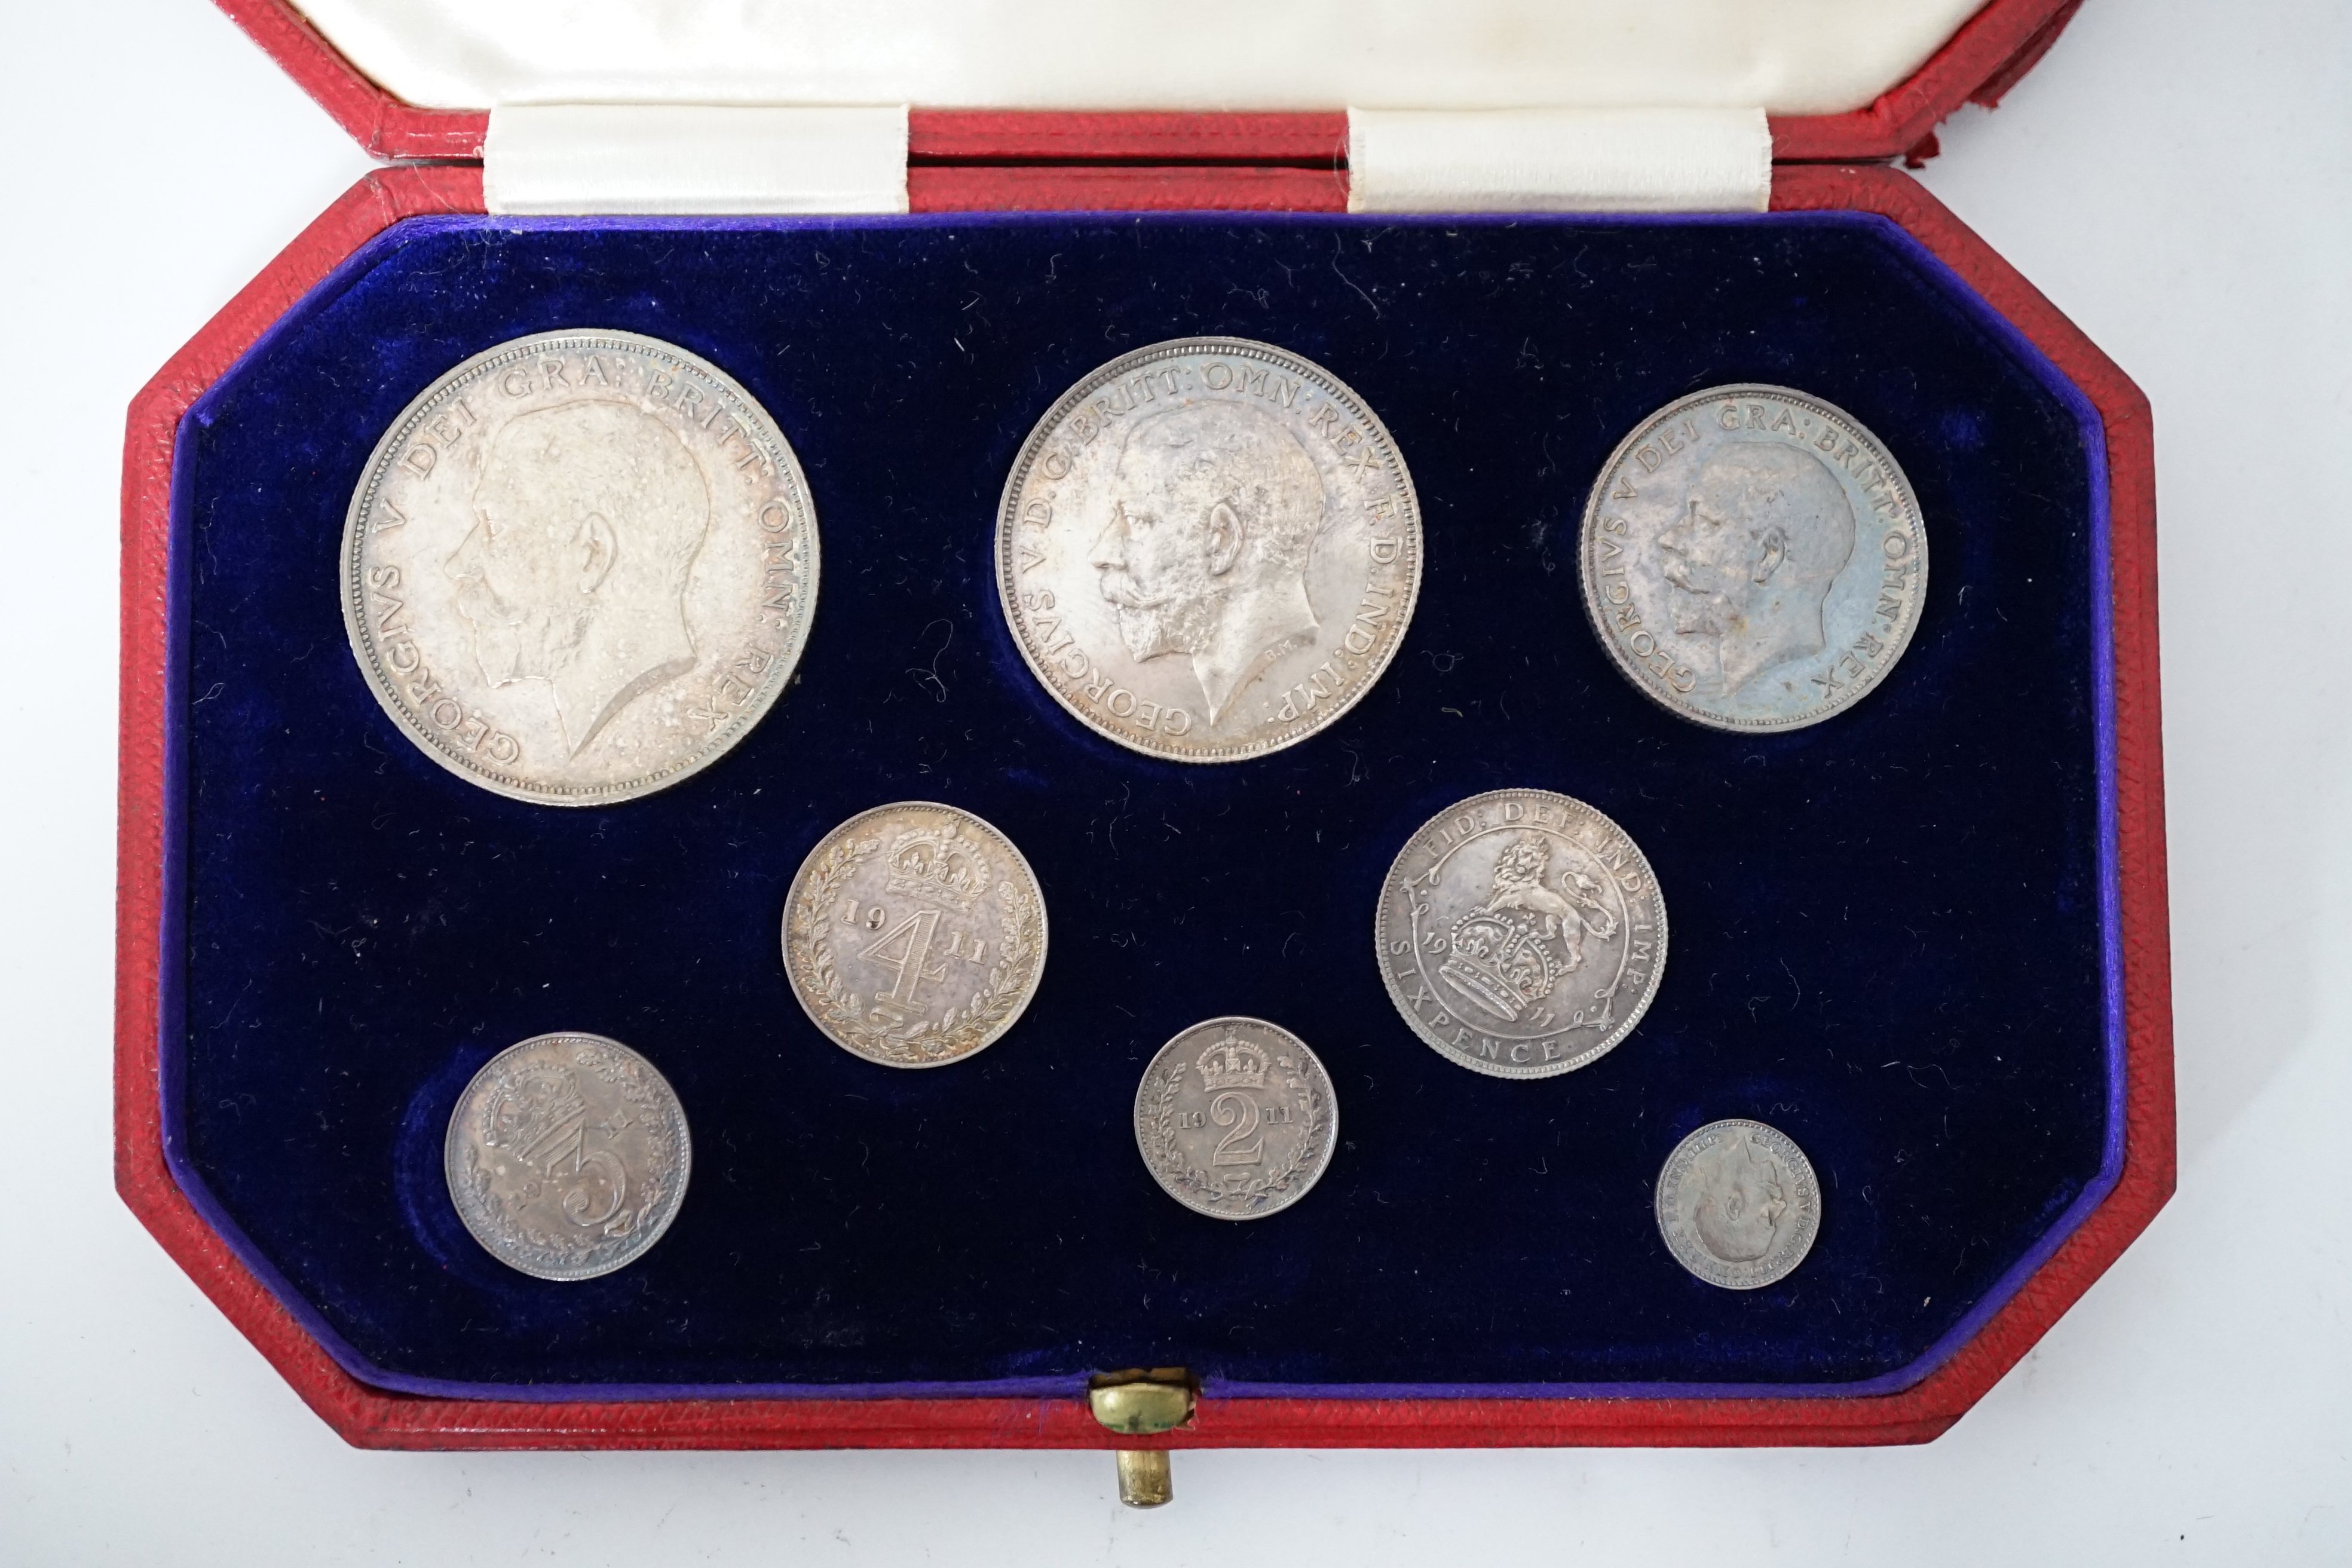 British Silver Coins, George V coronation specimen eight coin set, 1911, ranging from halfcrown to maundy penny, in case of issue